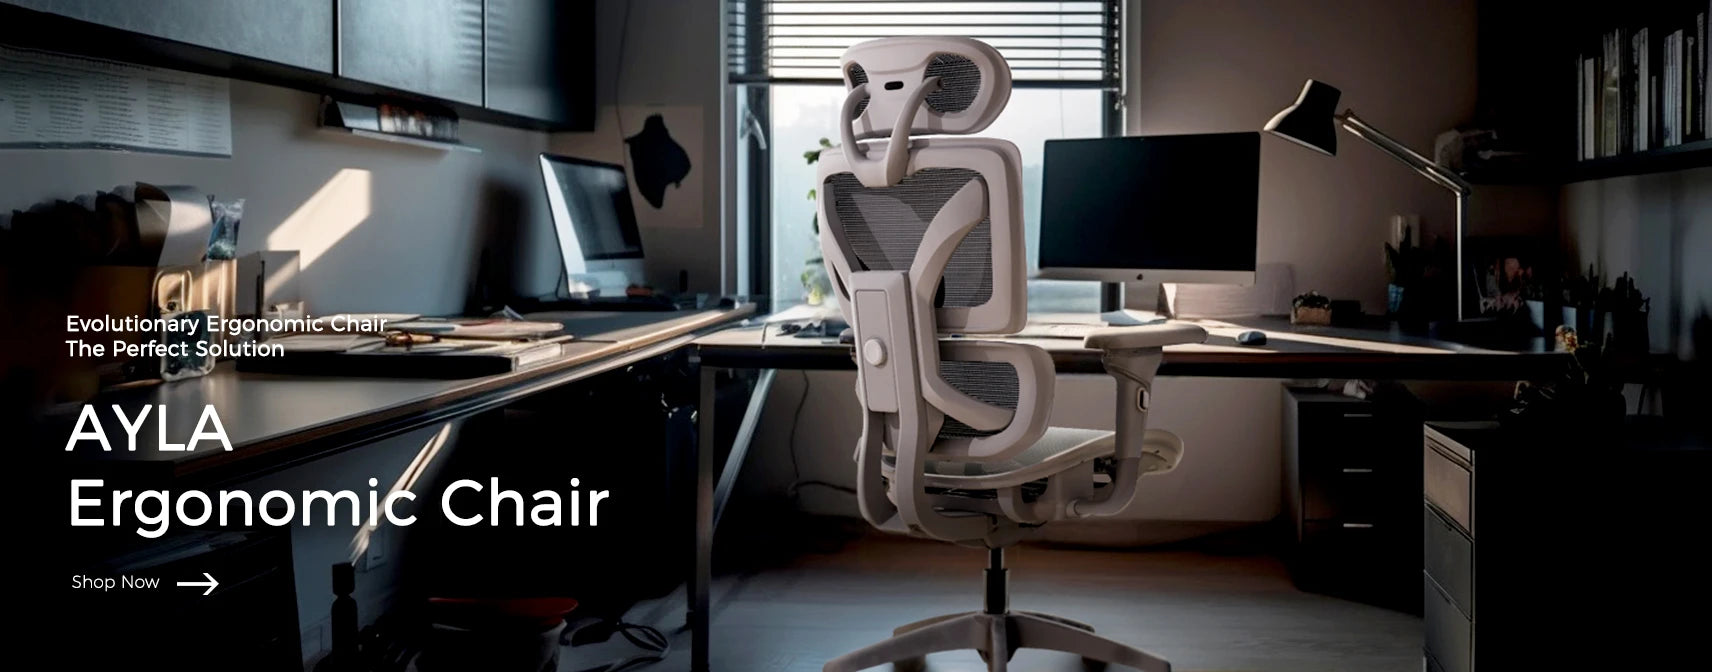 Ayla Ergonomic Chair with advanced lumbar support and adjustable armrests for optimal seating comfort, positioned in a modern home office setting.